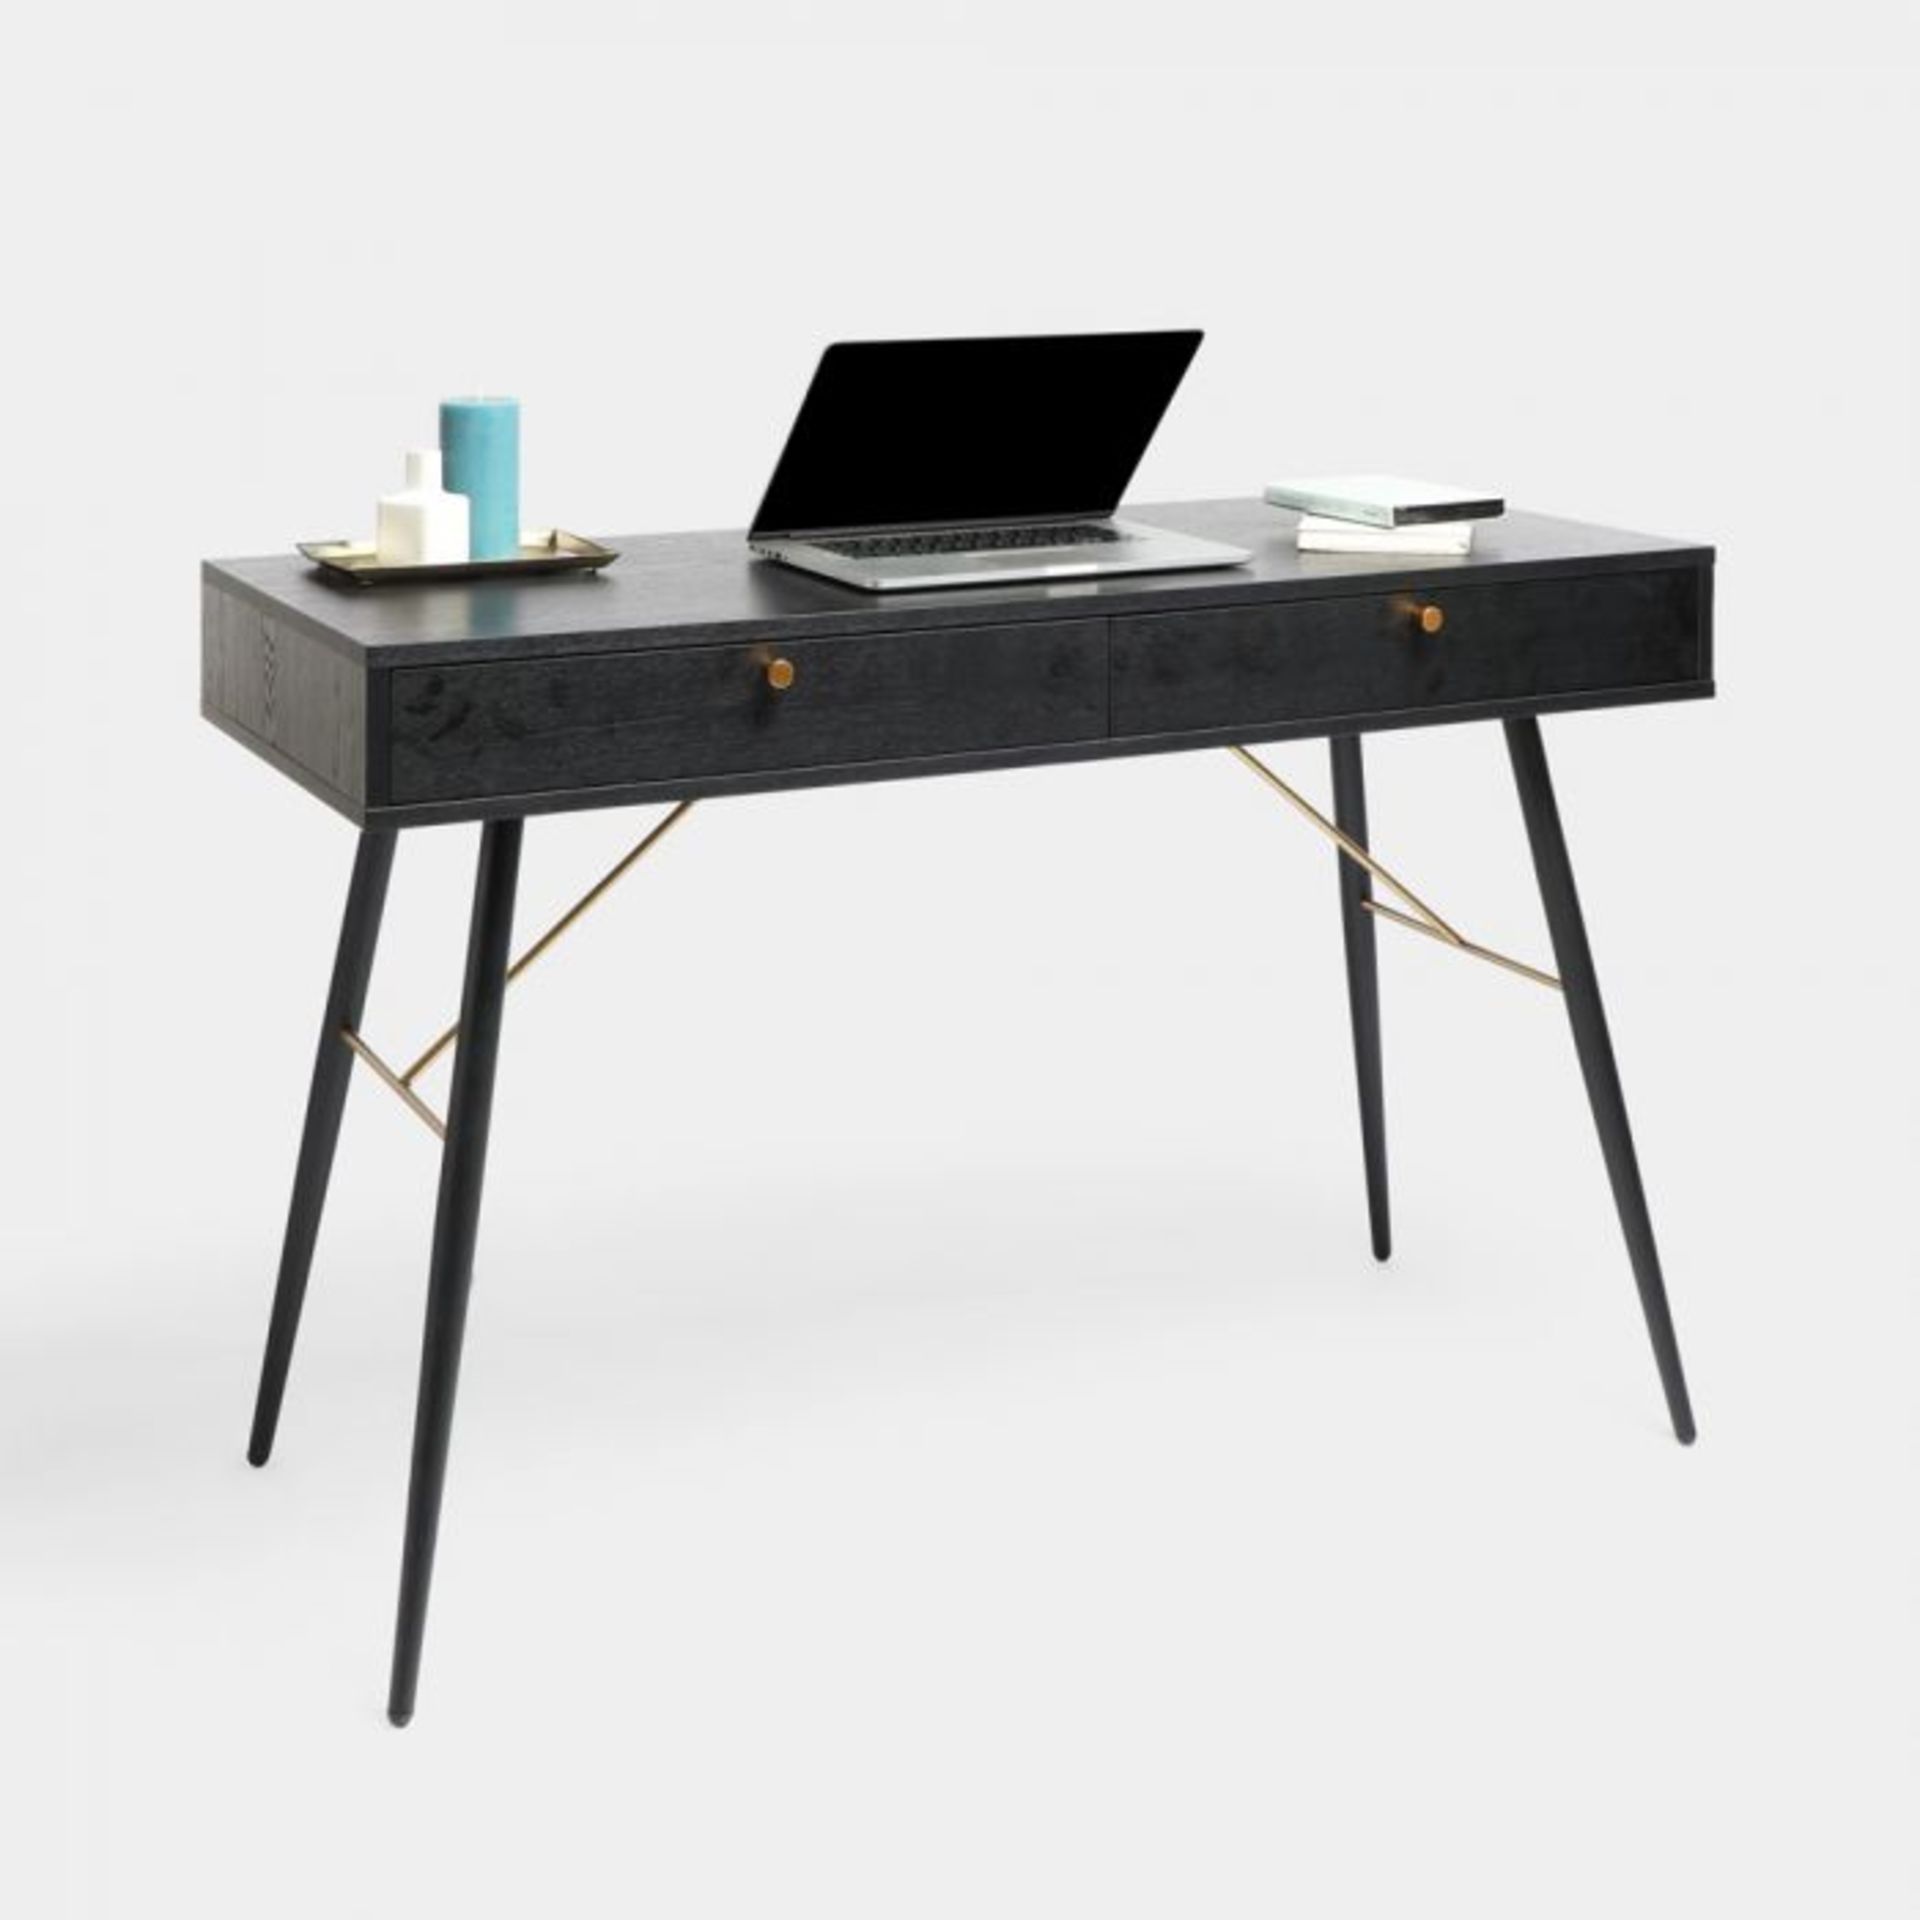 2 Drawer Black Dressing Table Desk. Bring a new level of style and functionality to your home